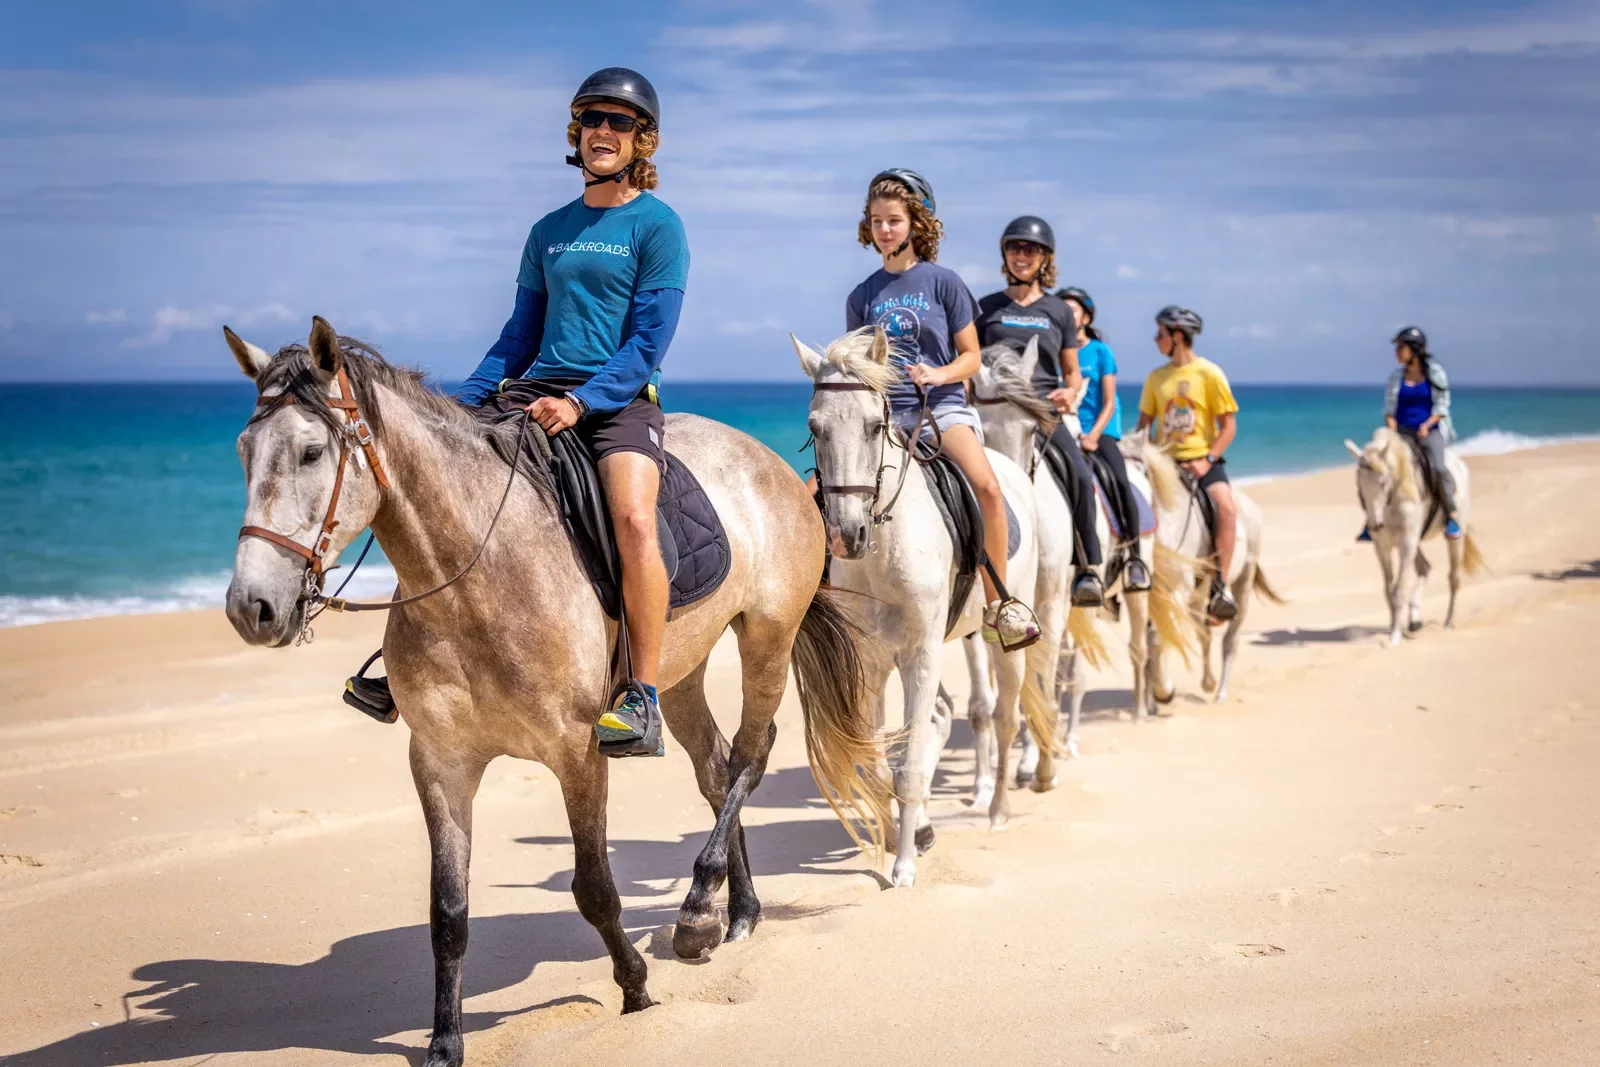 Backroads guests riding horses along the beach in Portugal